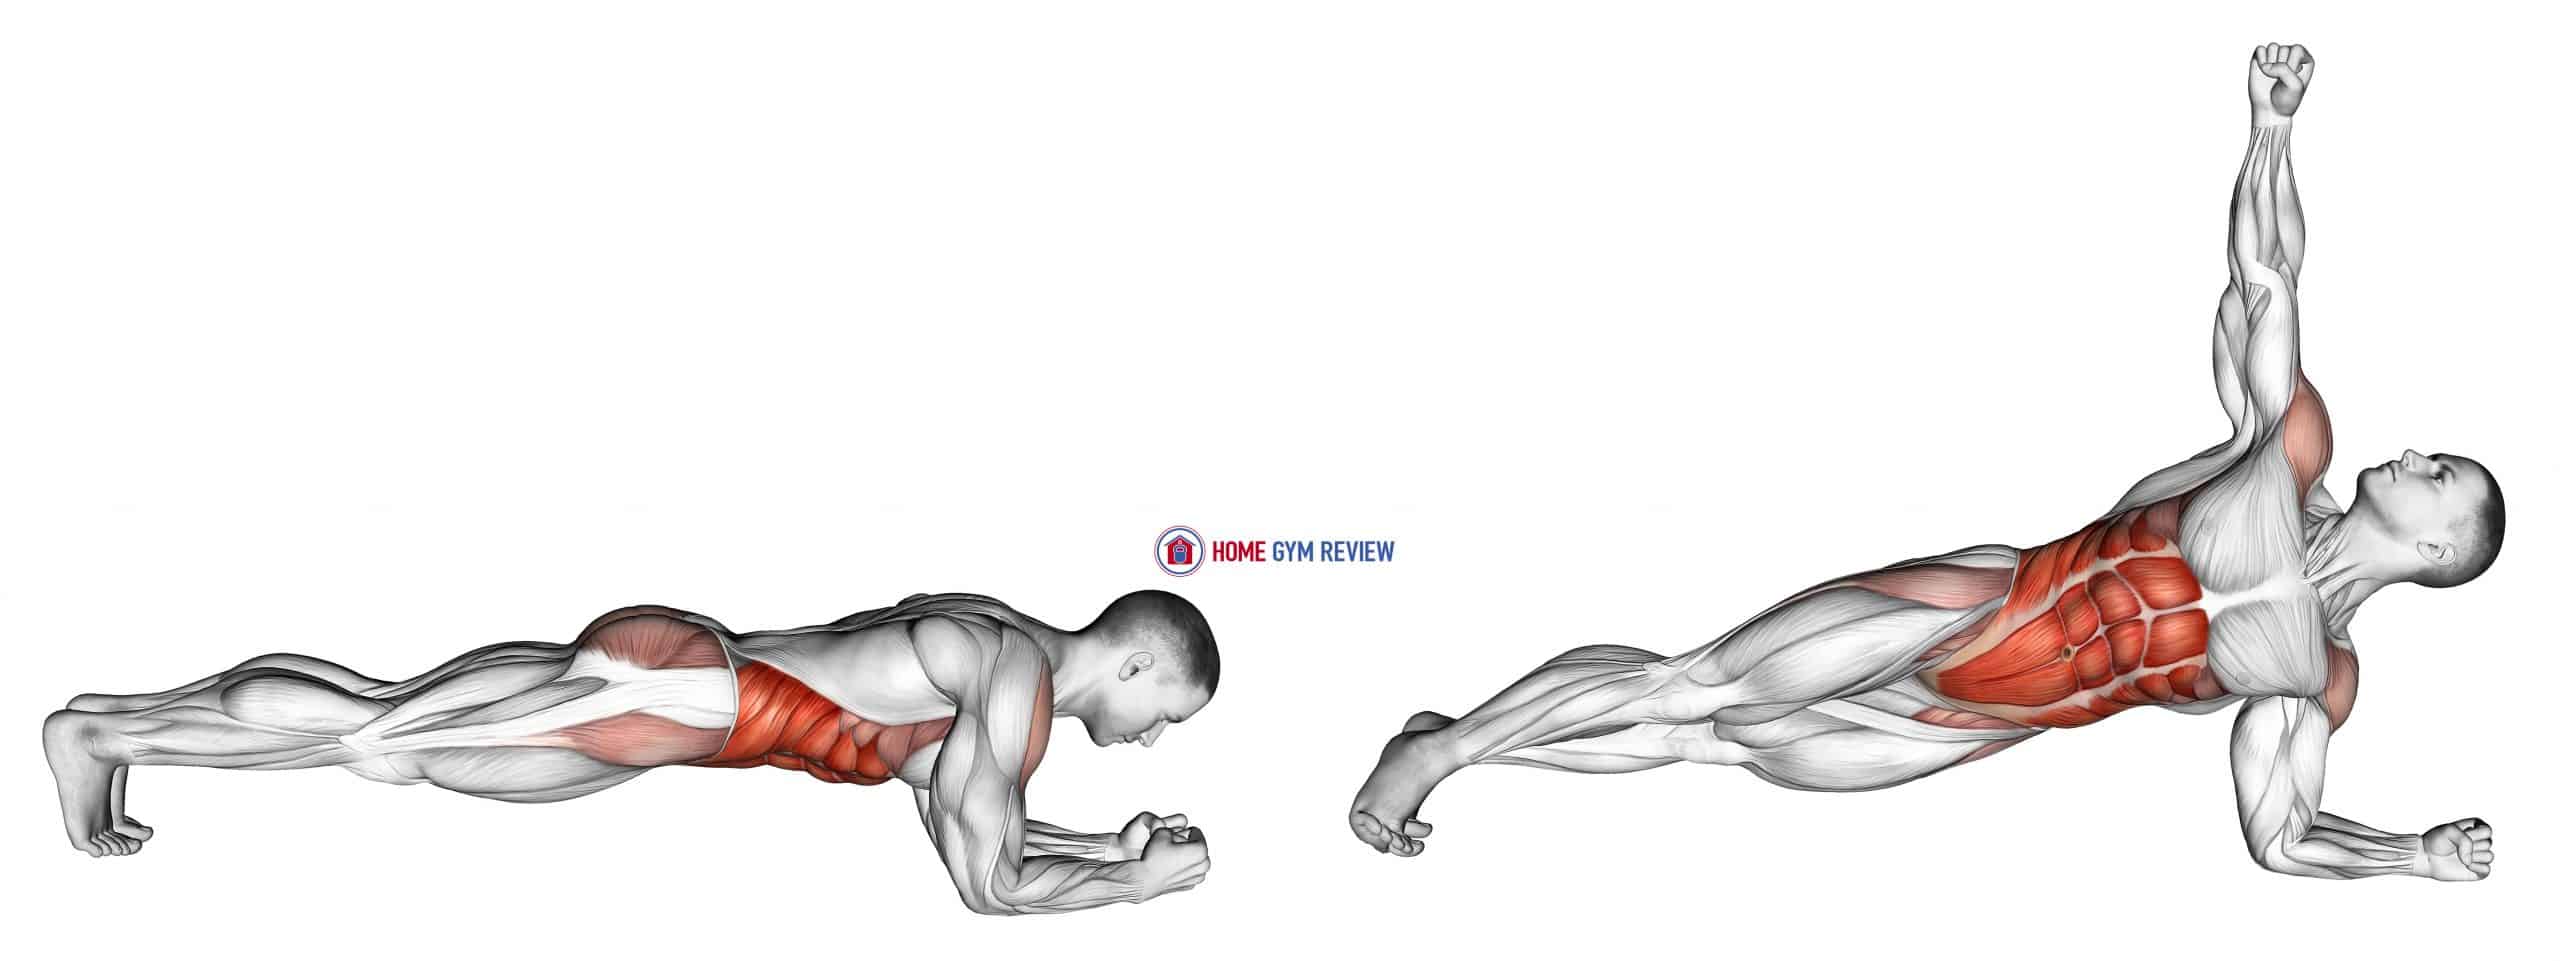 Front Plank with Twist